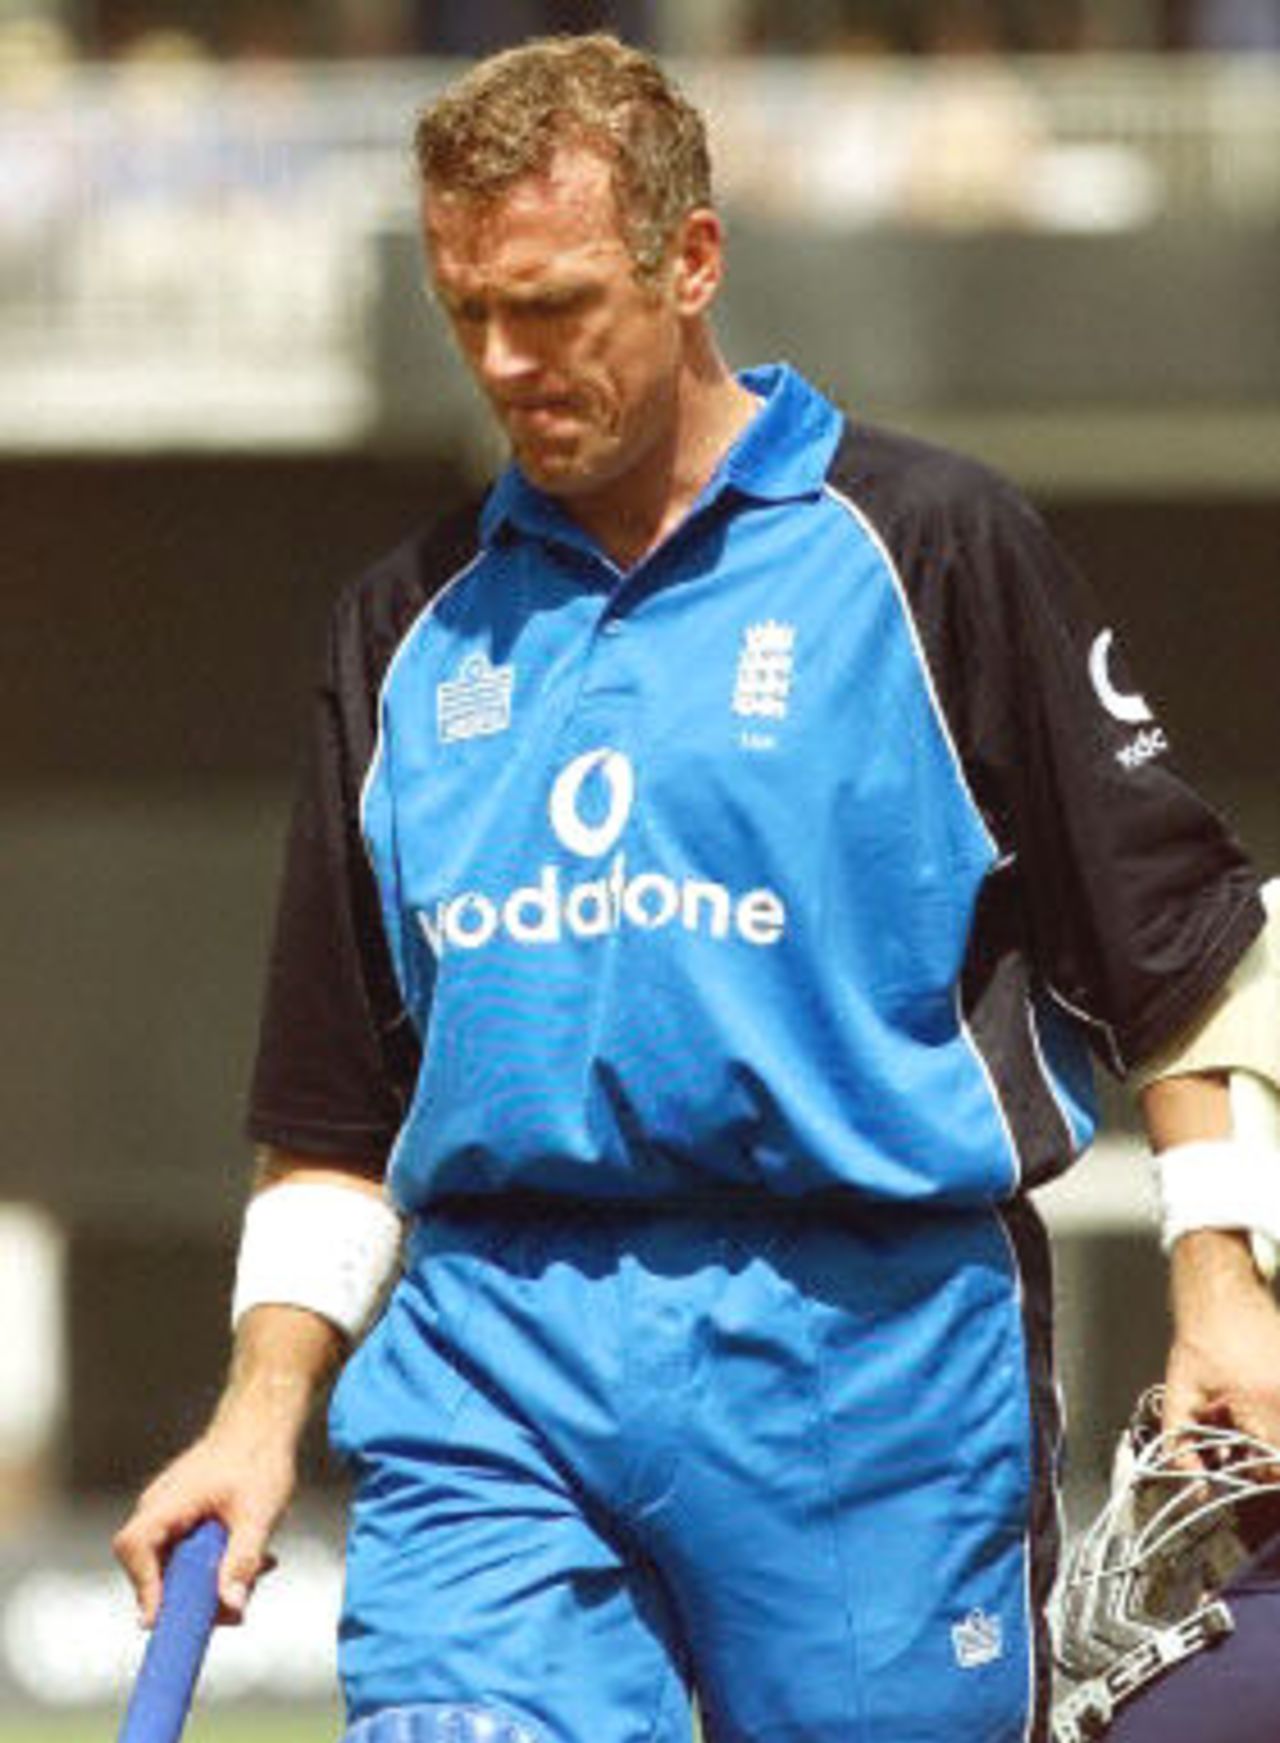 Alec Stewart looks dejected after being dismissed by Brett Lee, 9th ODI at the Oval, 21 June 2001.